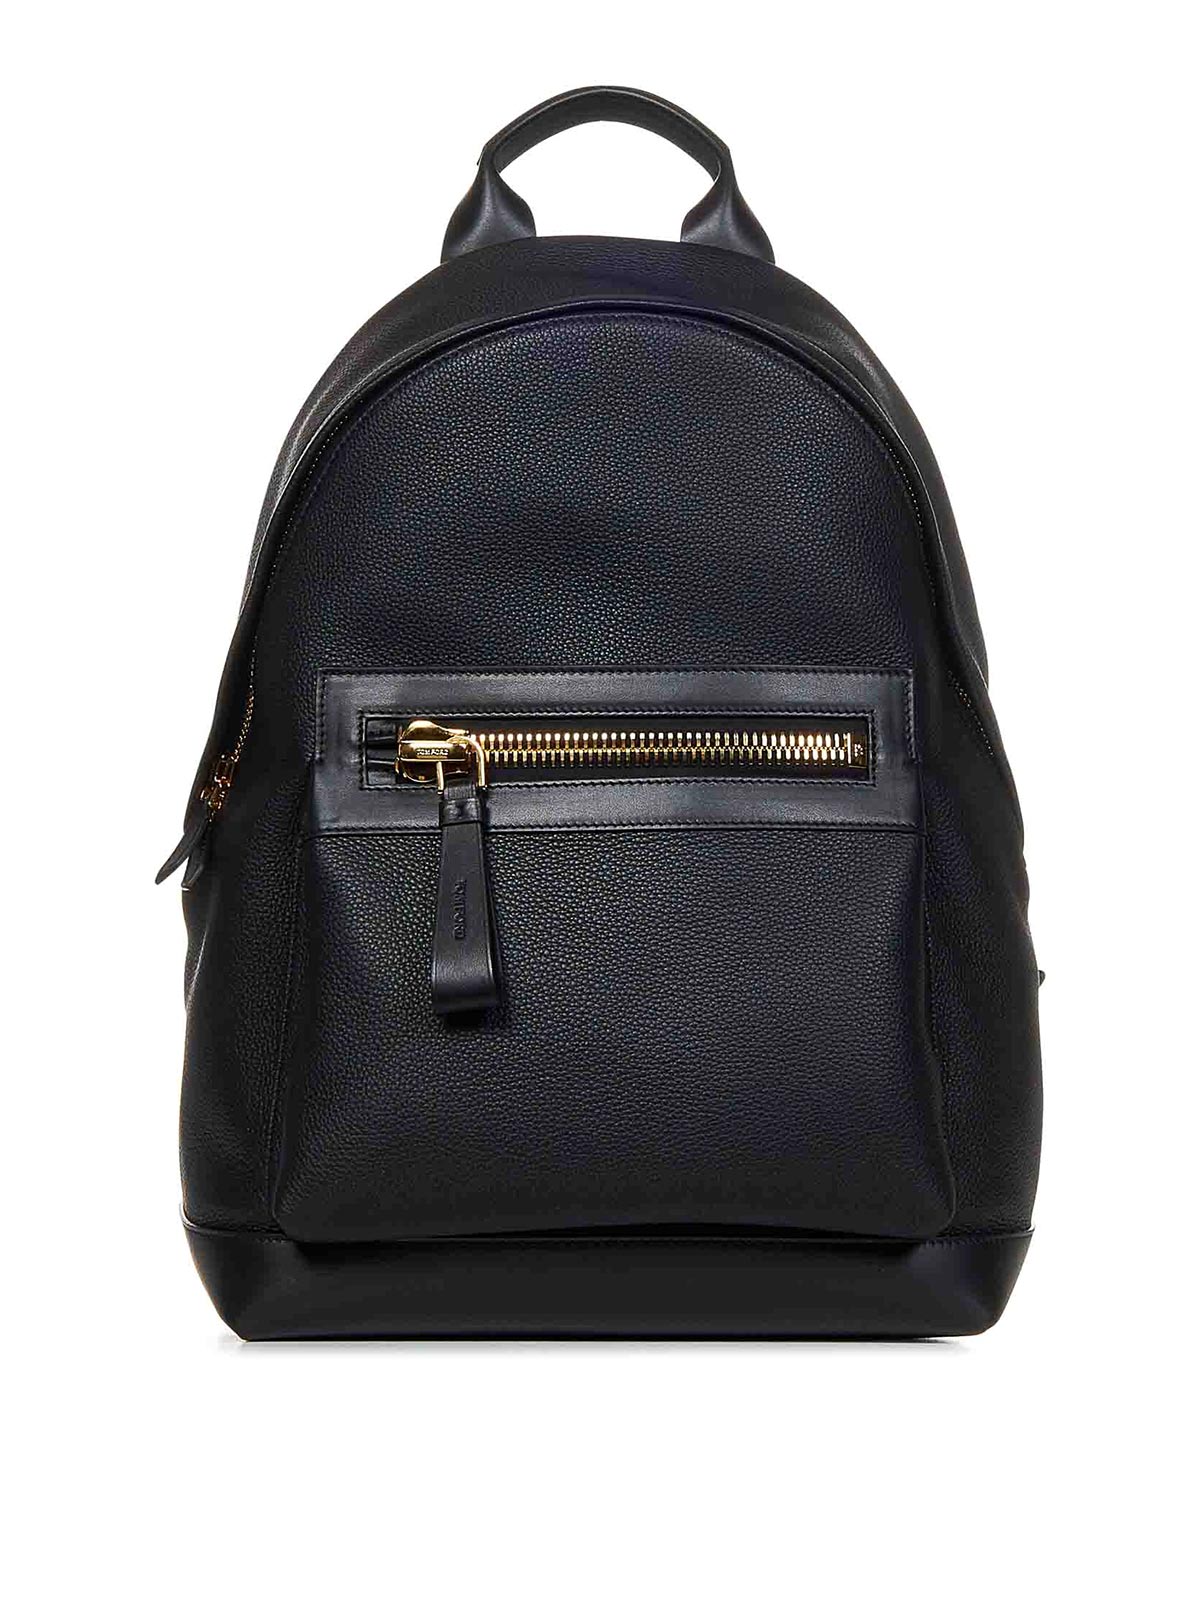 Tom Ford Black Leather Backpack With Oversized Zip